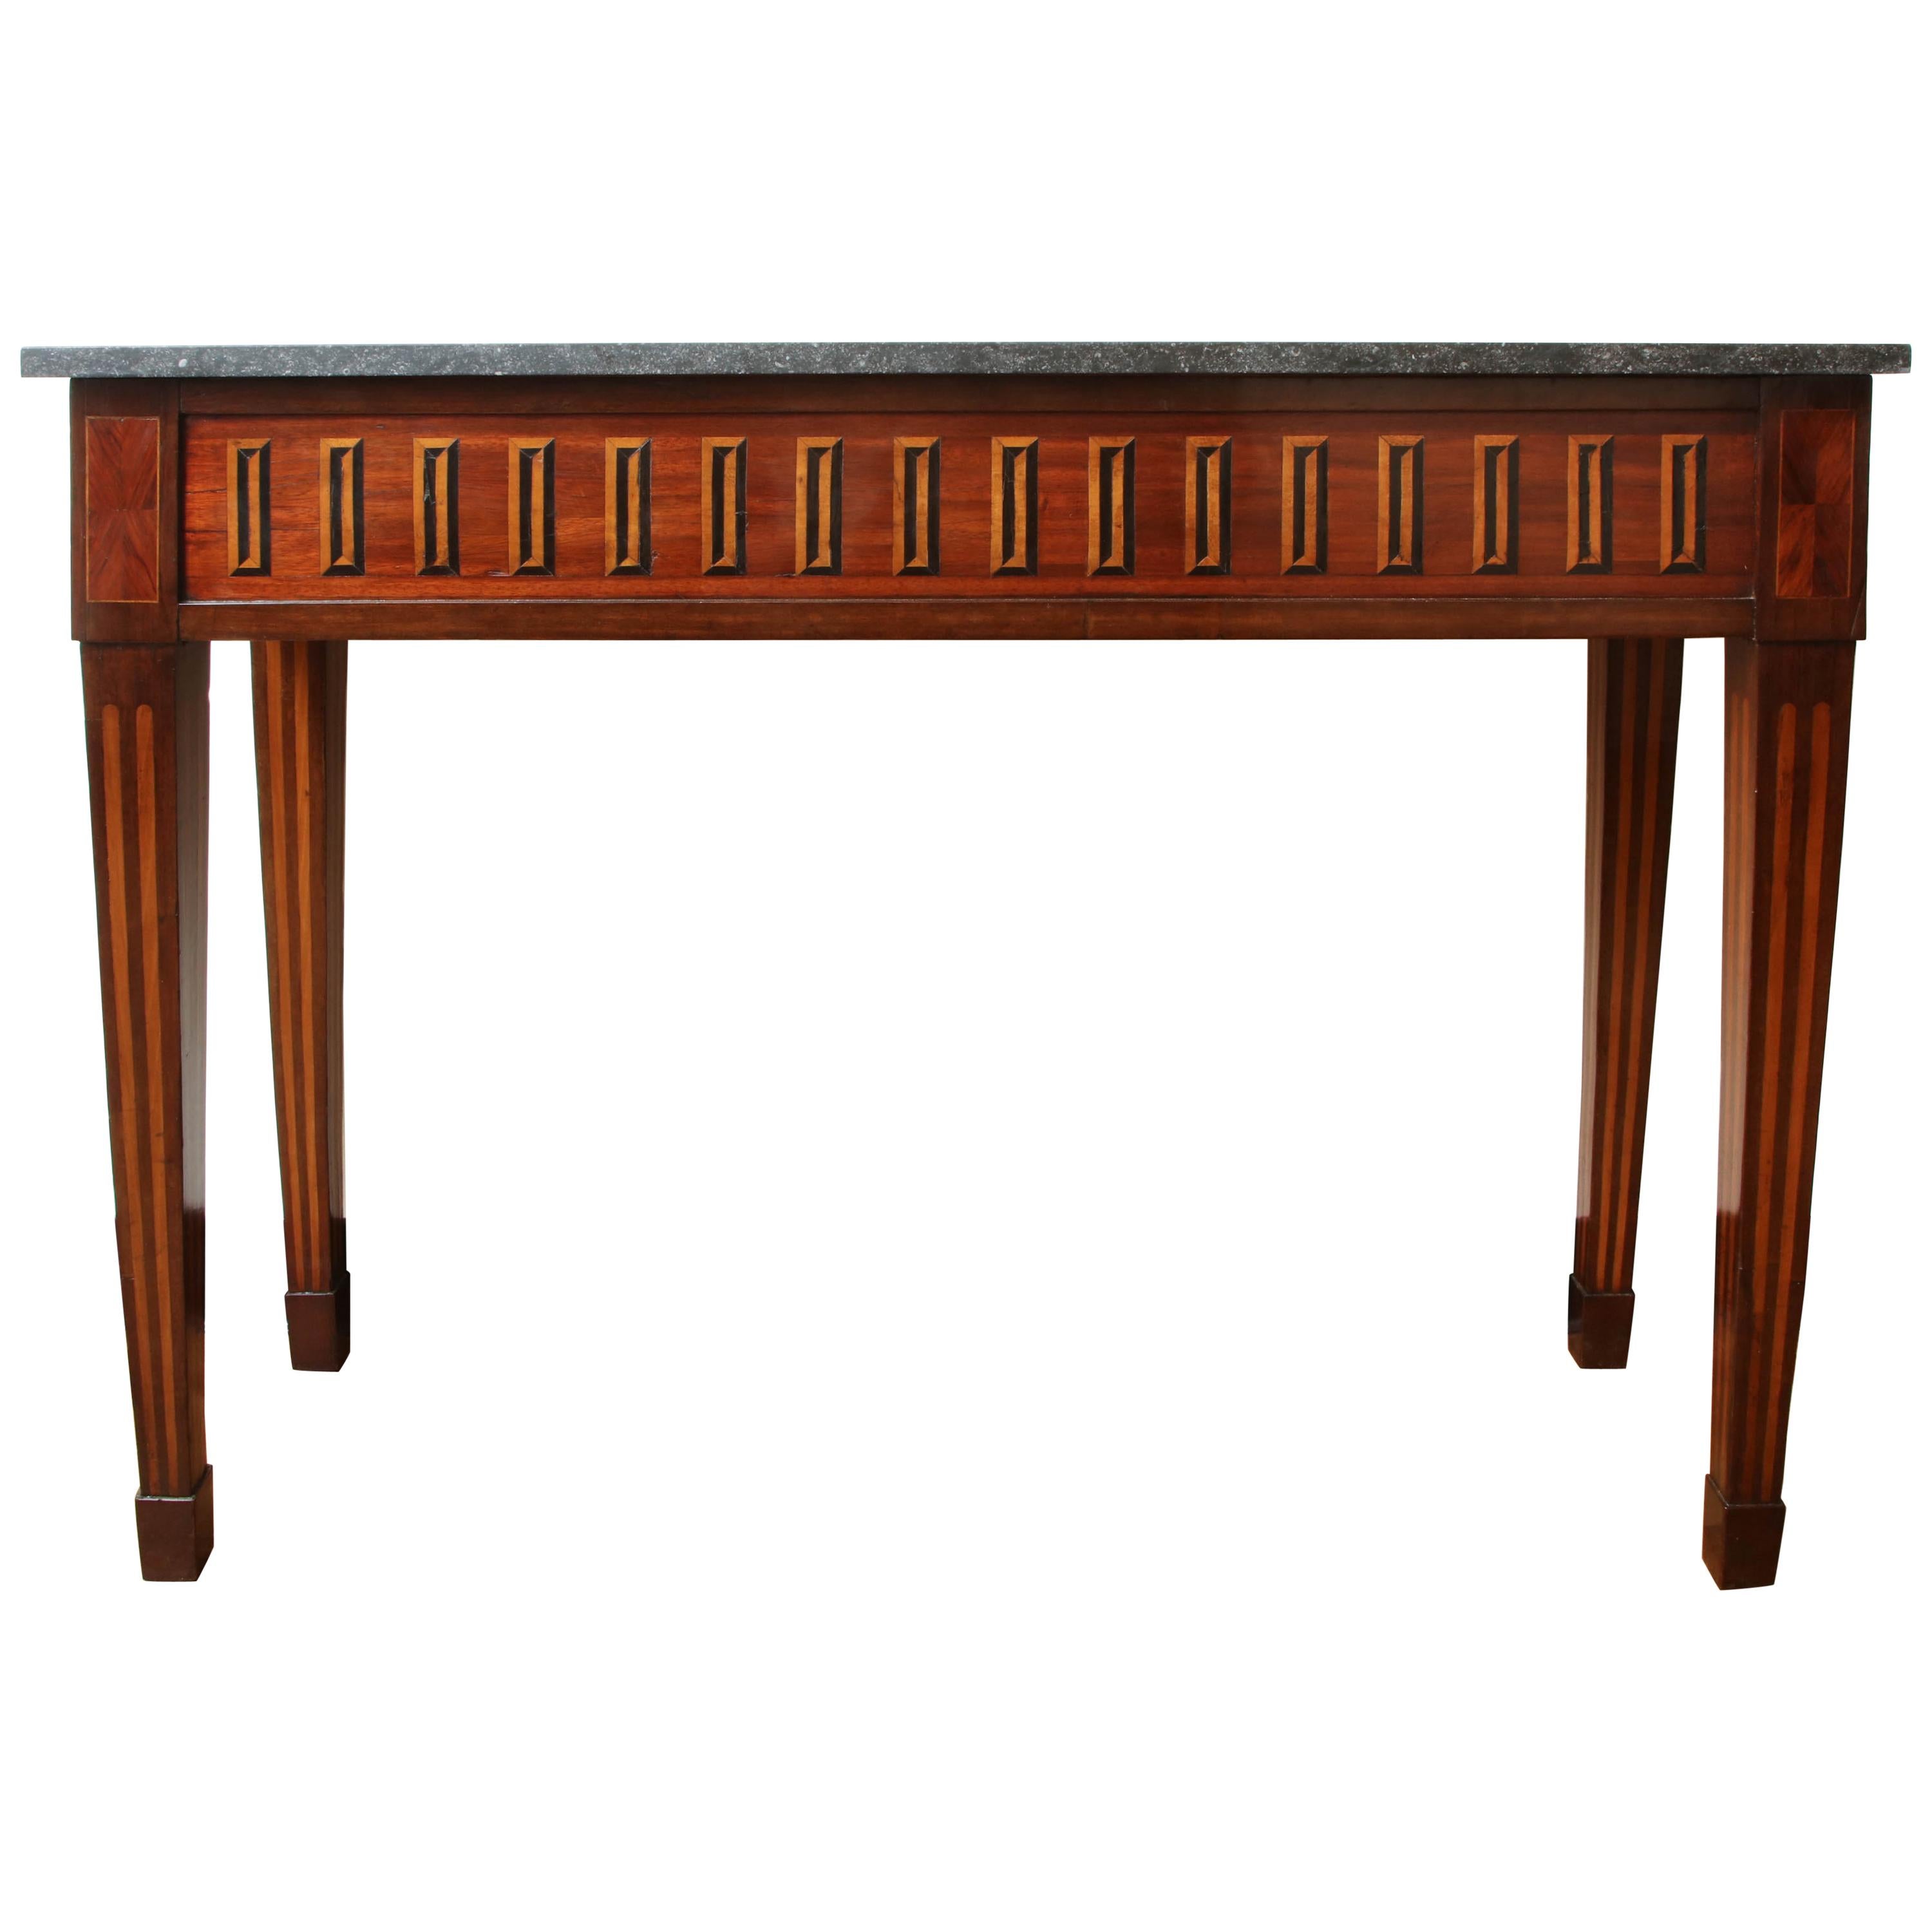 Italian Inlaid Ebony and Rosewood Console Table with a Belgian Blue Stone Top For Sale